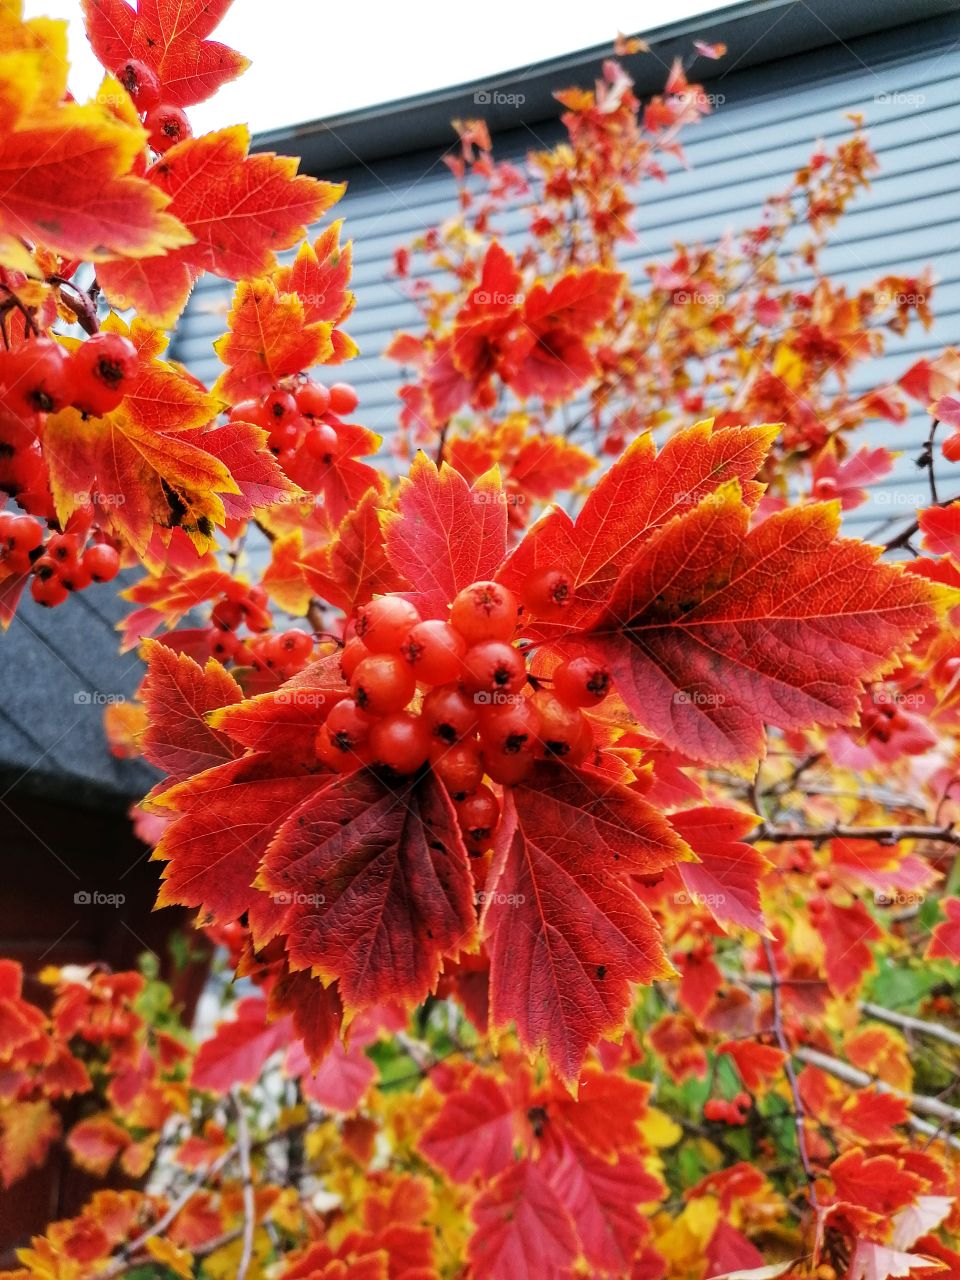 Hawthorn in a gorgeous red color in the fall!